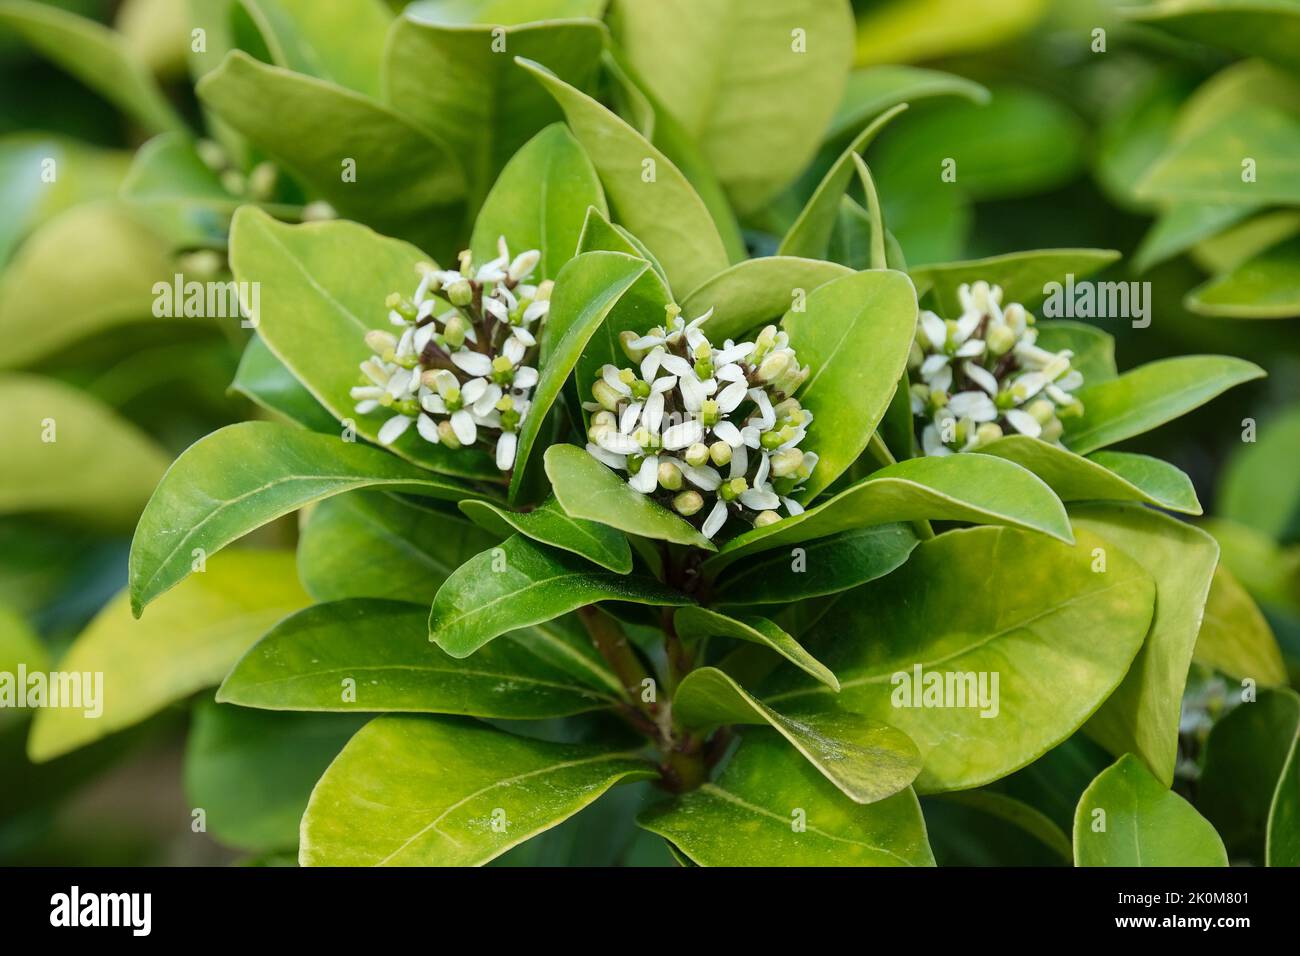 Skimmia japonica subspecies pumila. Terminal panicles of small white / yellowish flowers in Spring Stock Photo